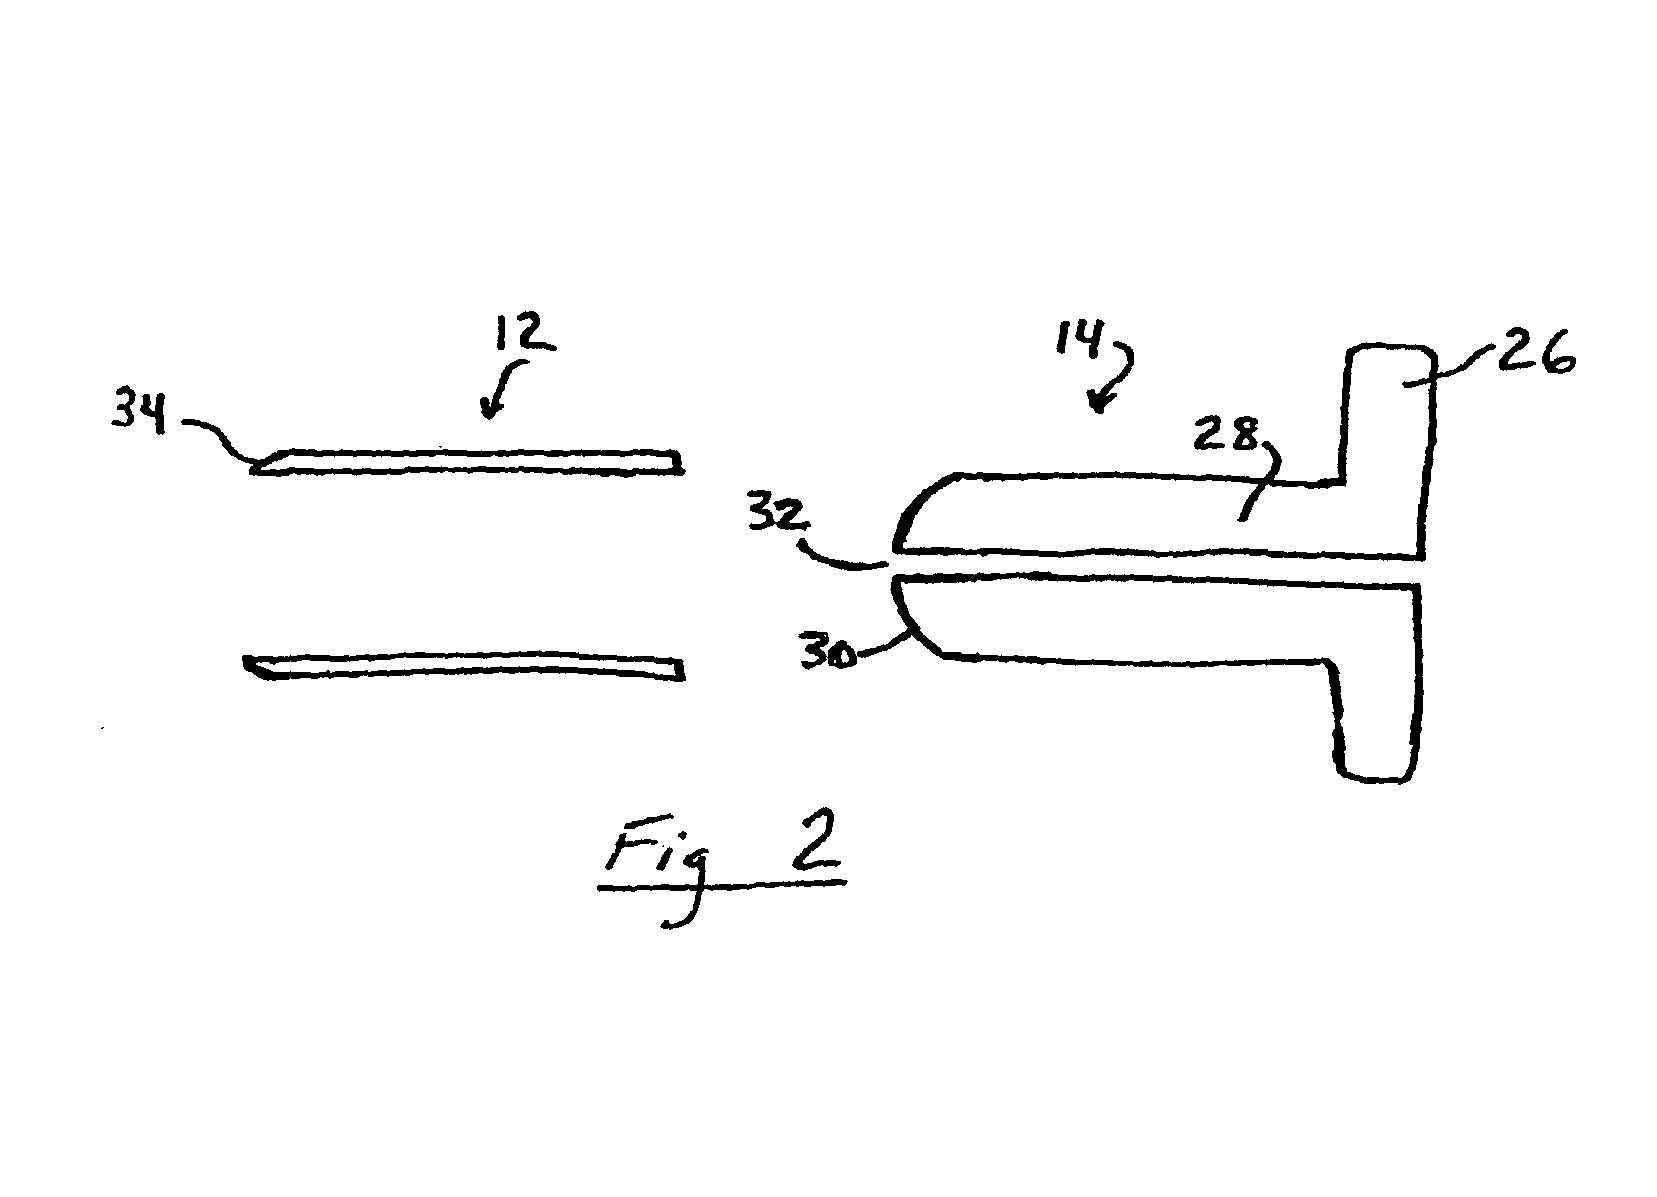 Apparatus and methods for performing brain surgery